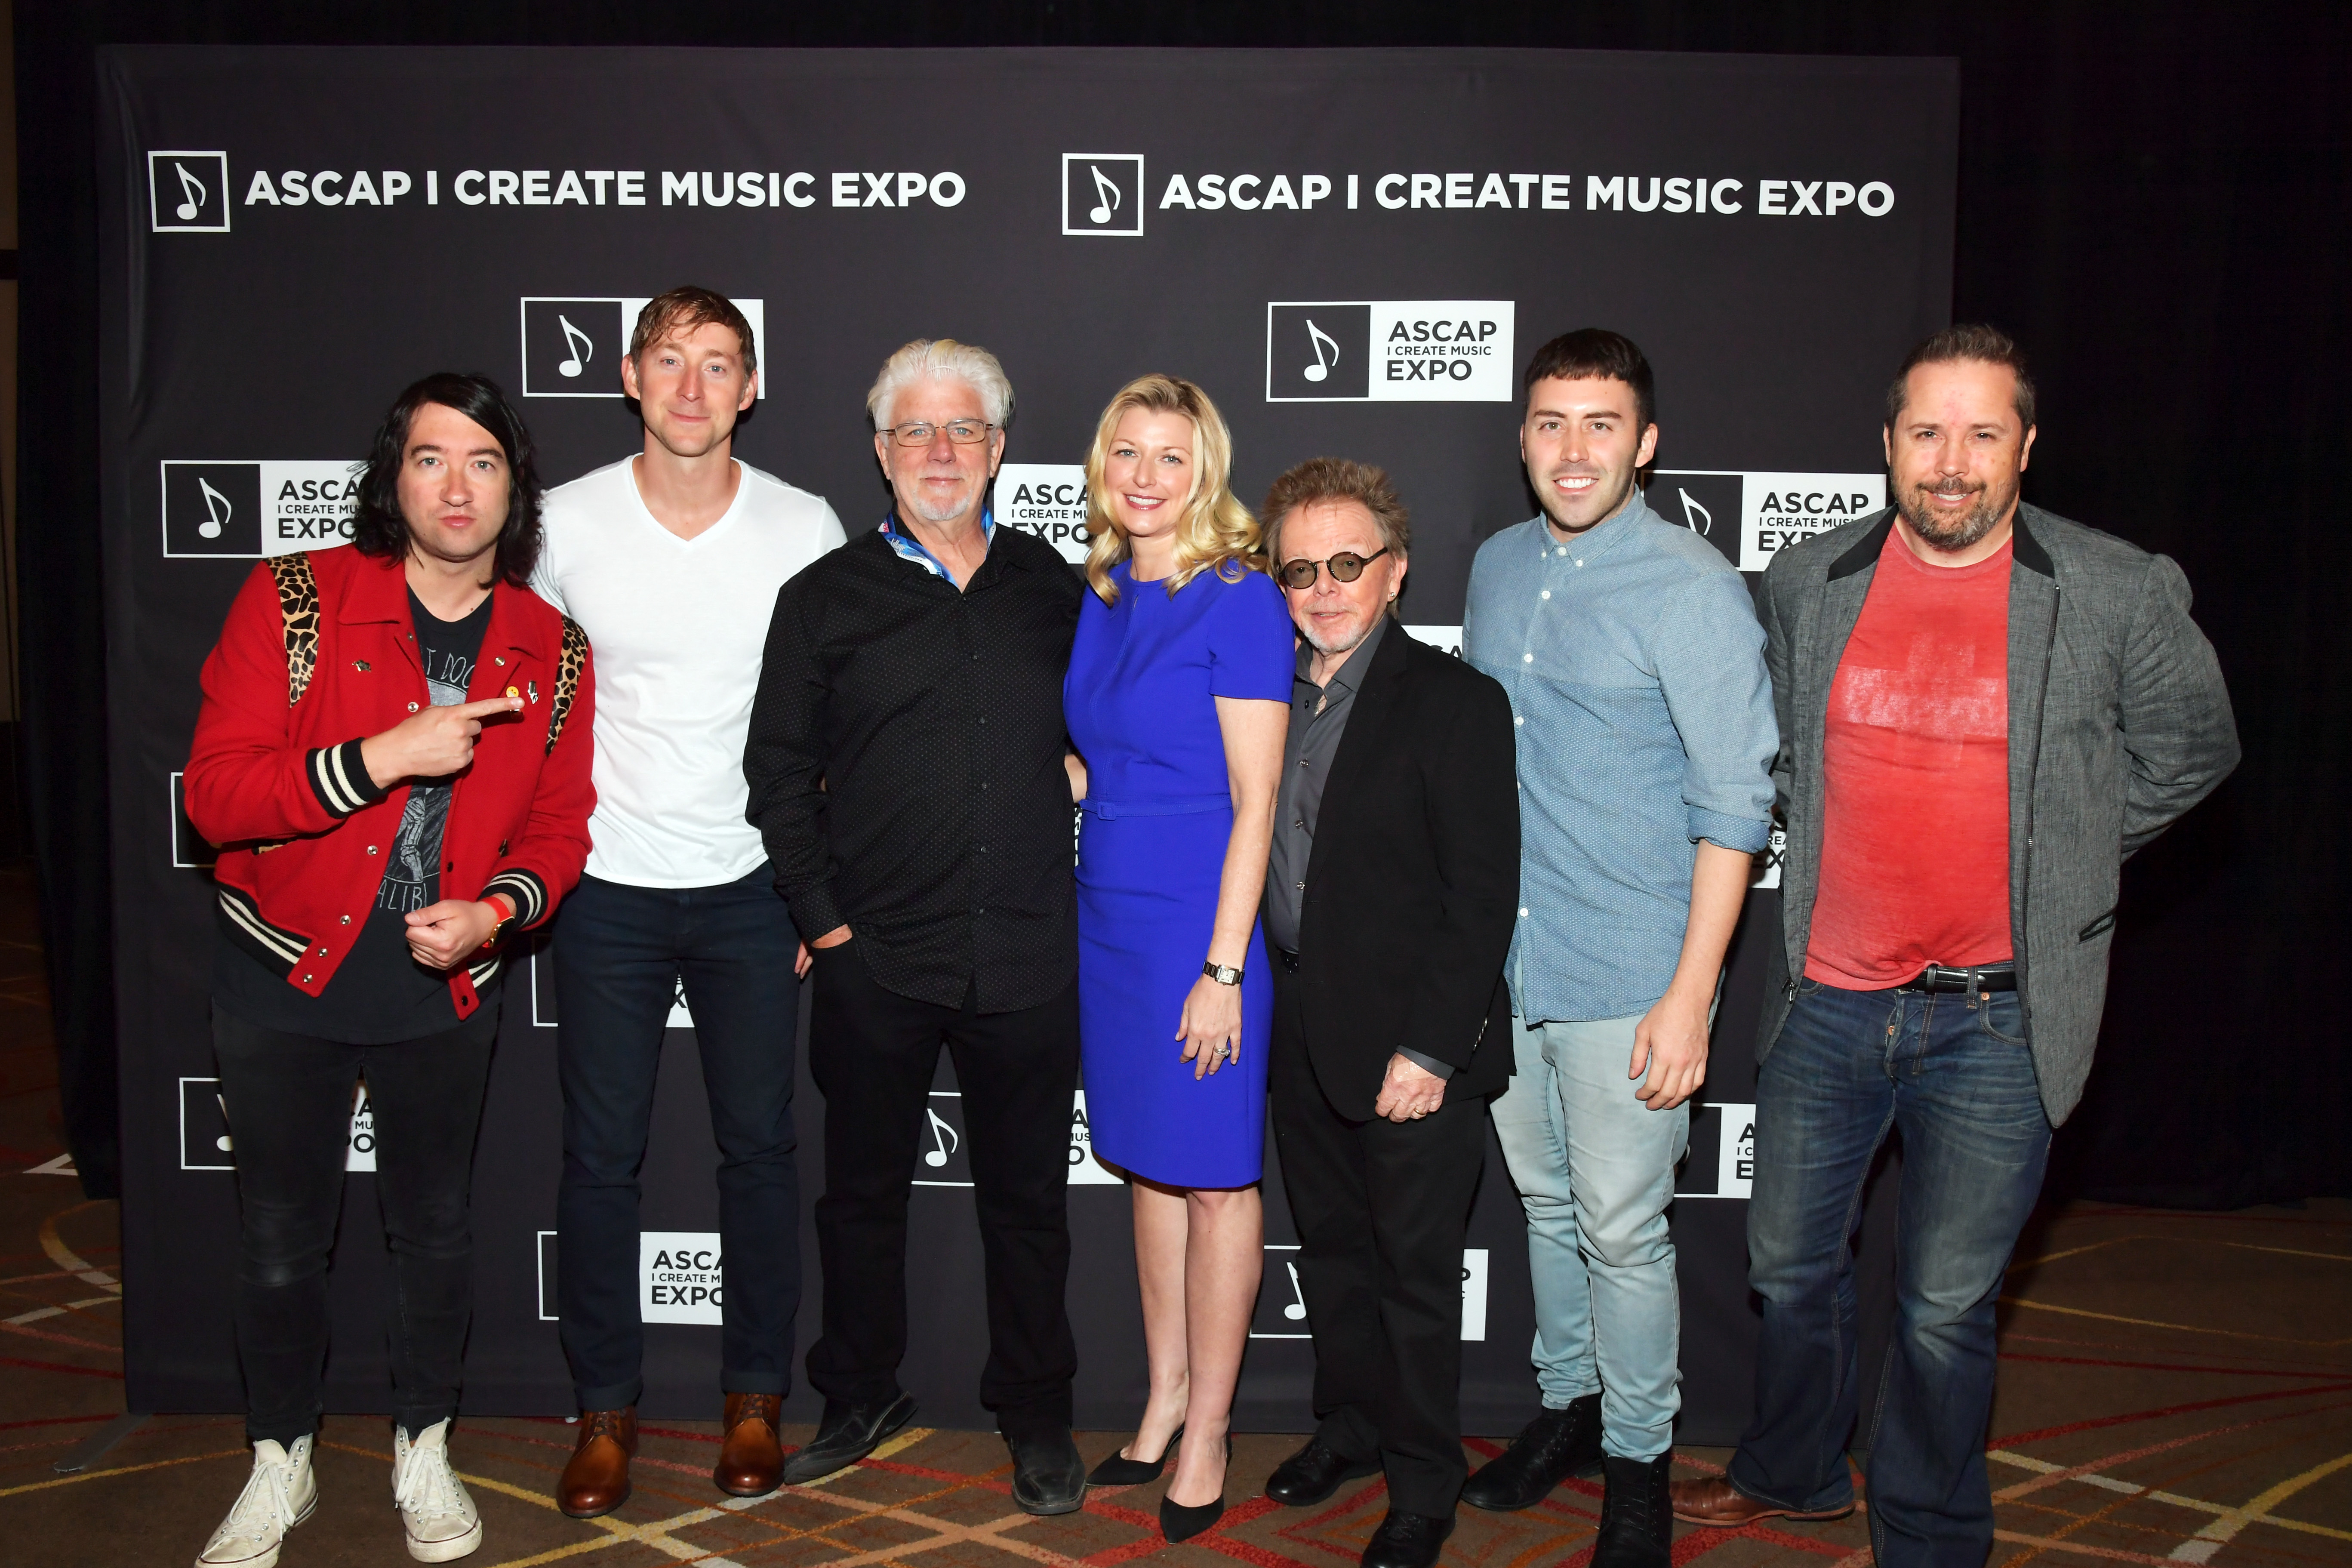 LOS ANGELES, CA - APRIL 13:  (L-R) Singer-songwriter Tom Higgenson, songwriter Ashley Gorley, singer Michael McDonald, Chief Executive Officer of ASCAP Elizabeth Matthews, President of ASCAP Paul Williams, singer-songwriter Brett McLaughlin, and composer Mateo Messina at the ASCAP Annual Membership.Meeting and EXPO Kickoff during the 2017 ASCAP "I Can Create Music" EXPO on April 13, 2017 in Los Angeles, California.  (Photo by Lester Cohen/Getty Images for ASCAP)